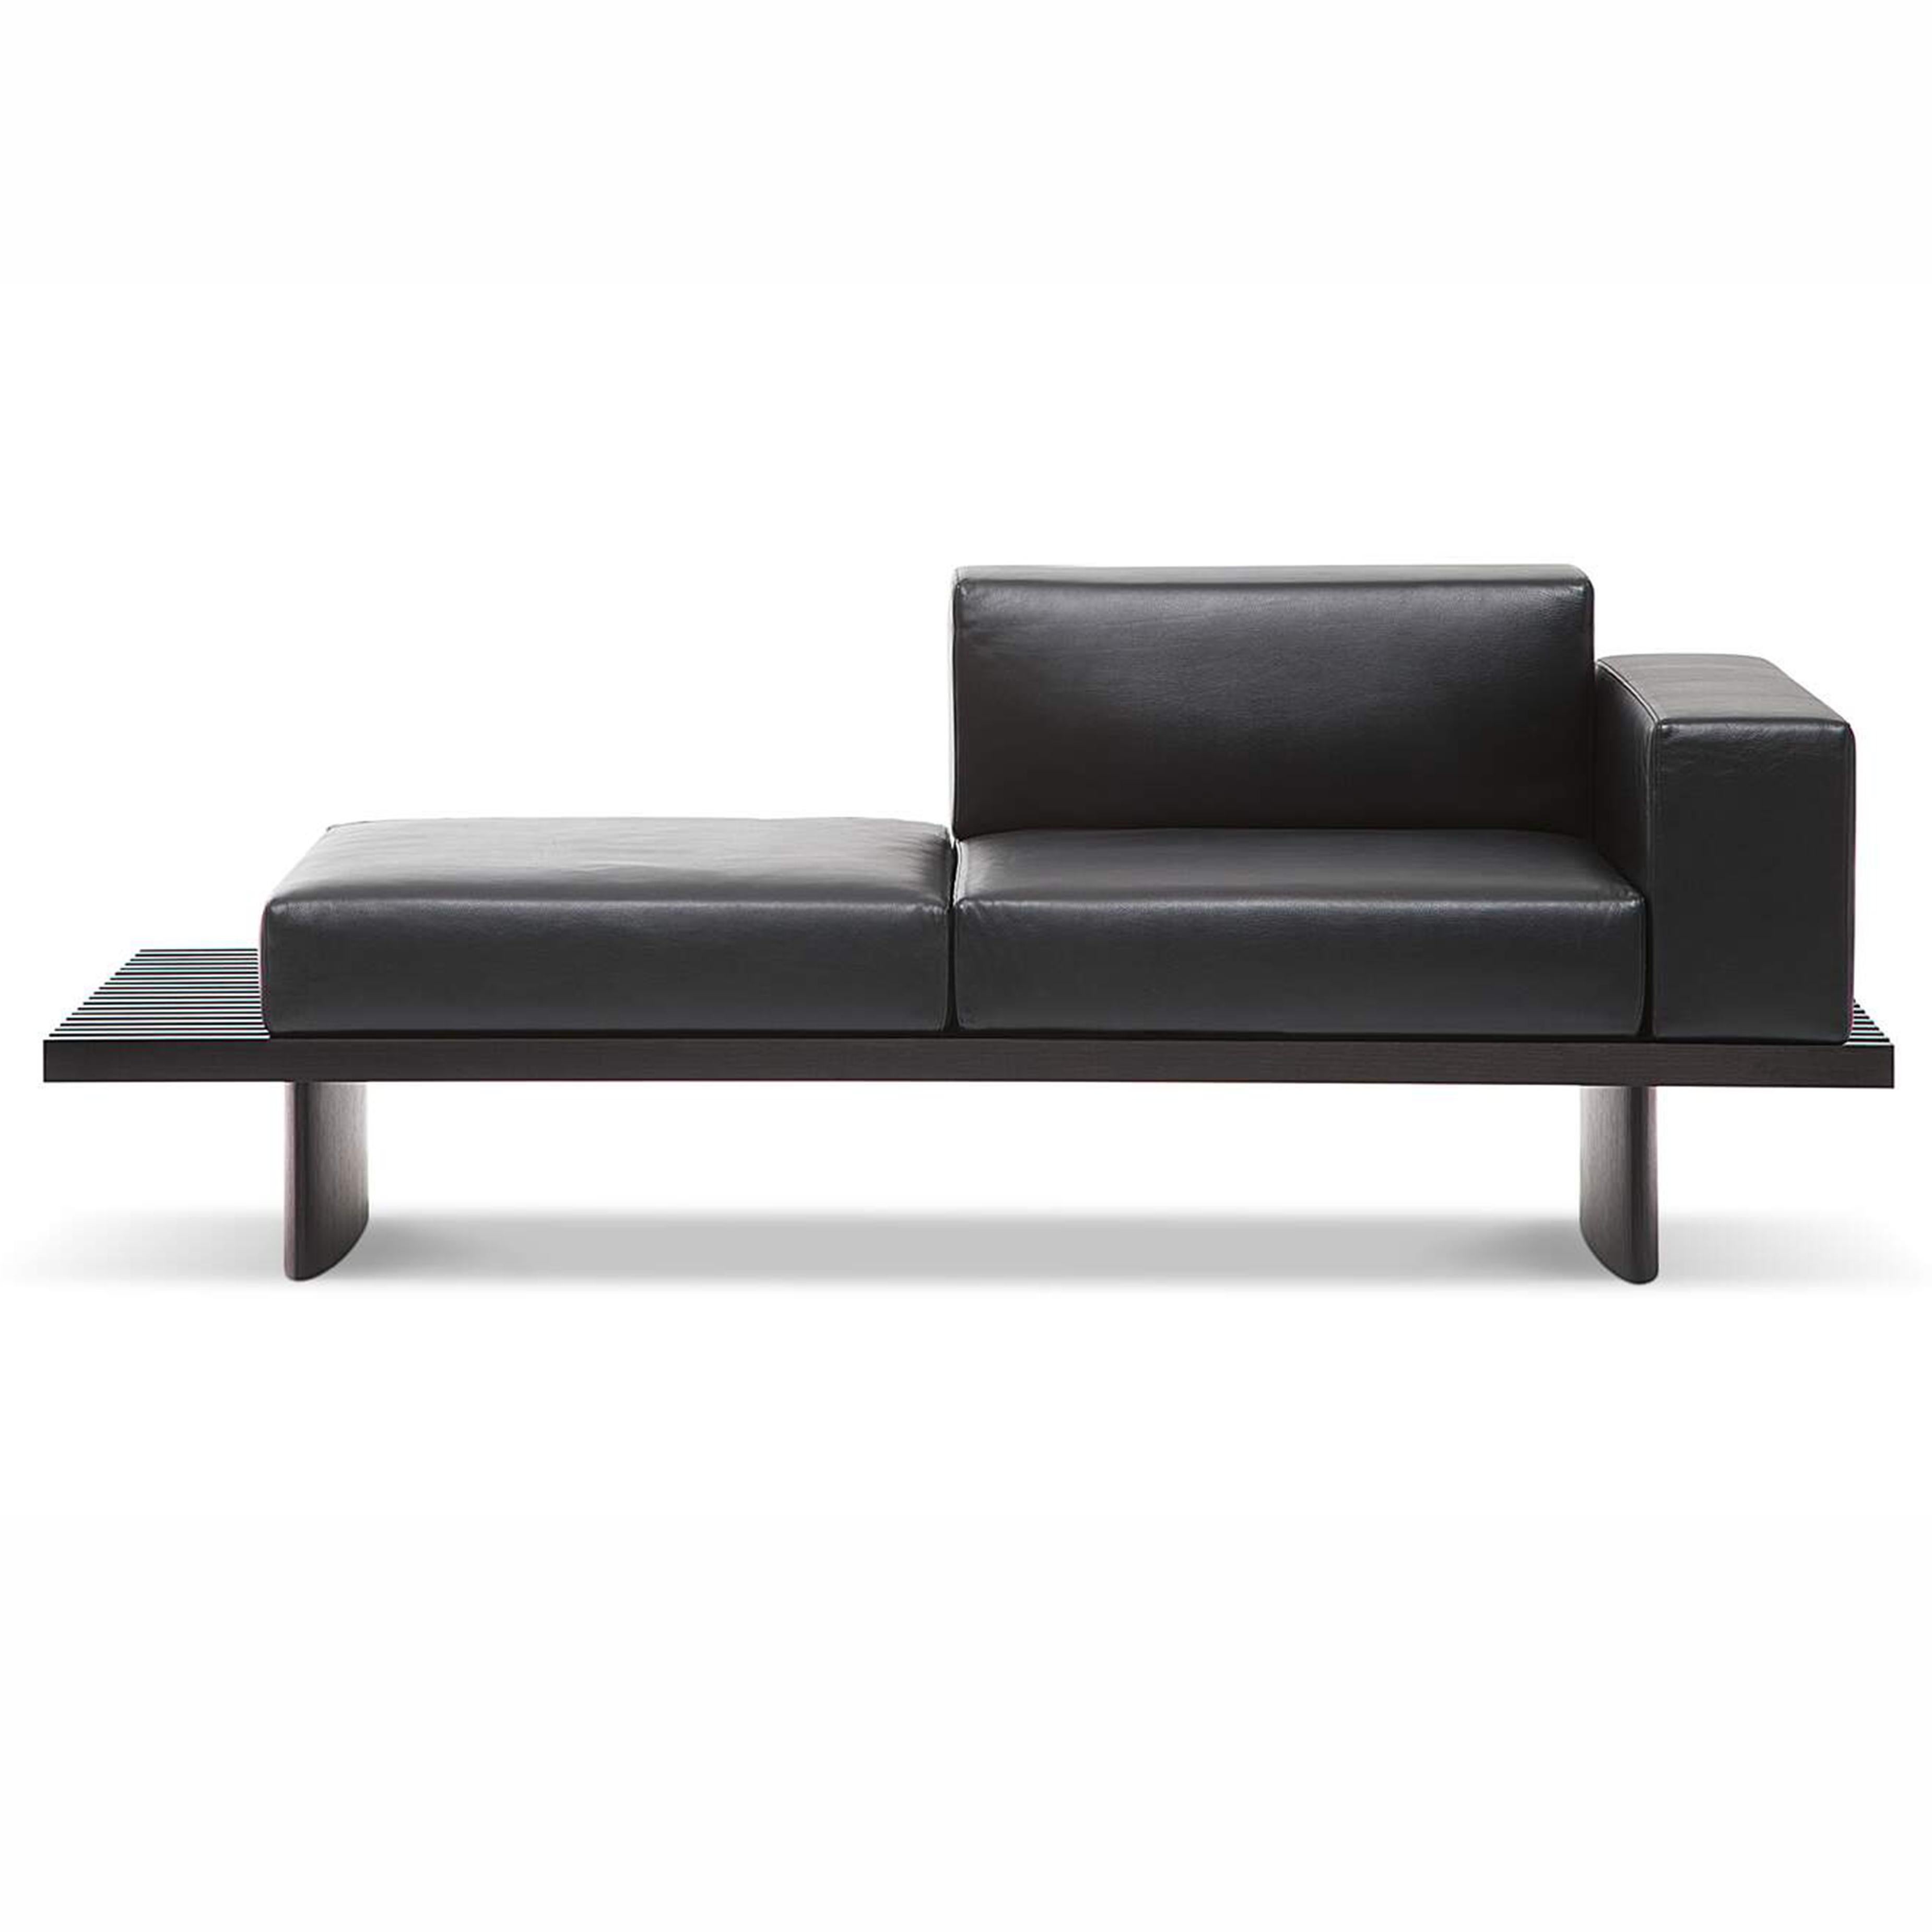 Charlotte Perriand Refolo Modular Sofa, Wood and Black Leather by Cassina For Sale 1